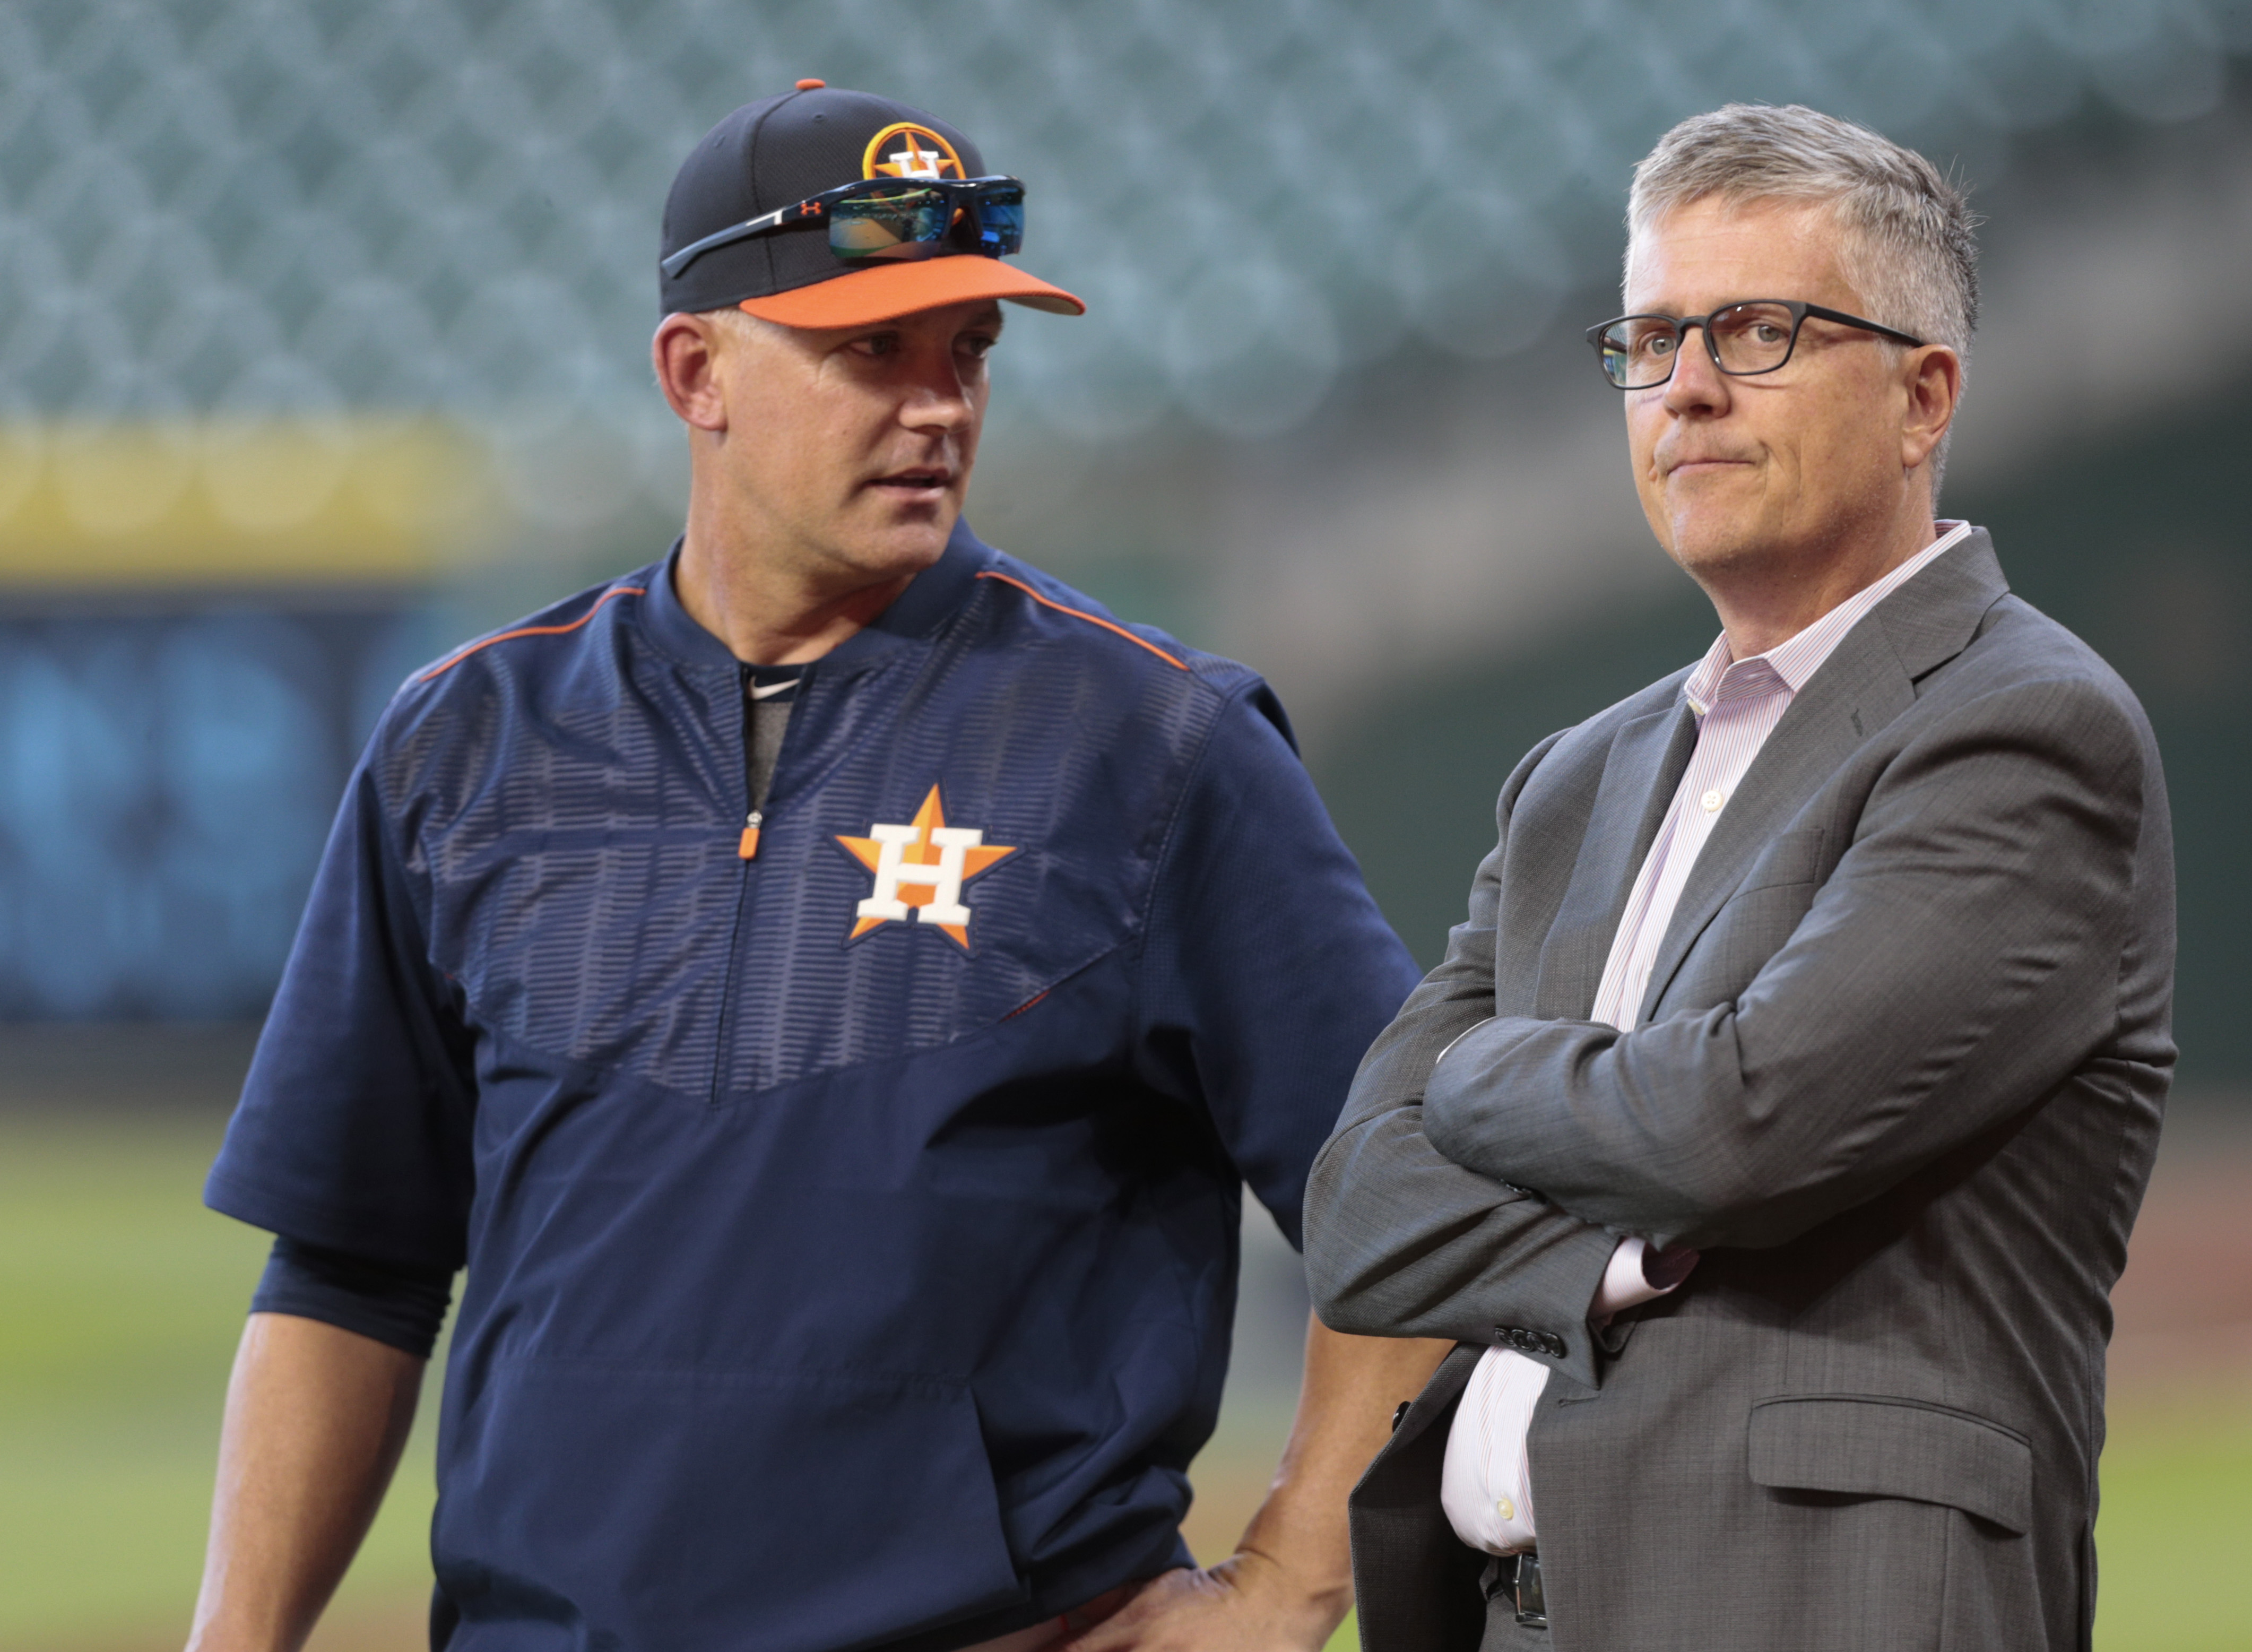 Houston Astros: A projection of the 2019 ALDS roster against Rays